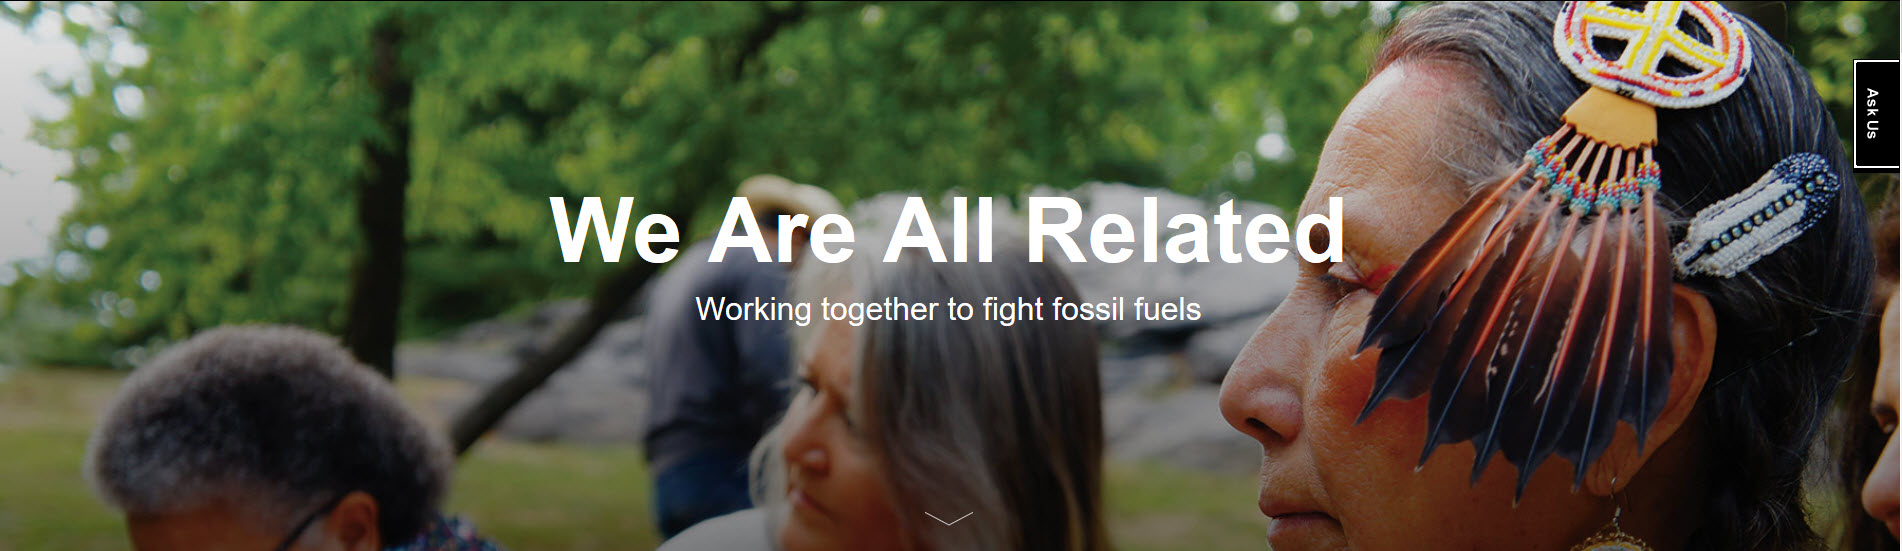 WE ARE ALL RELATED: Working together to fight fossil fuels